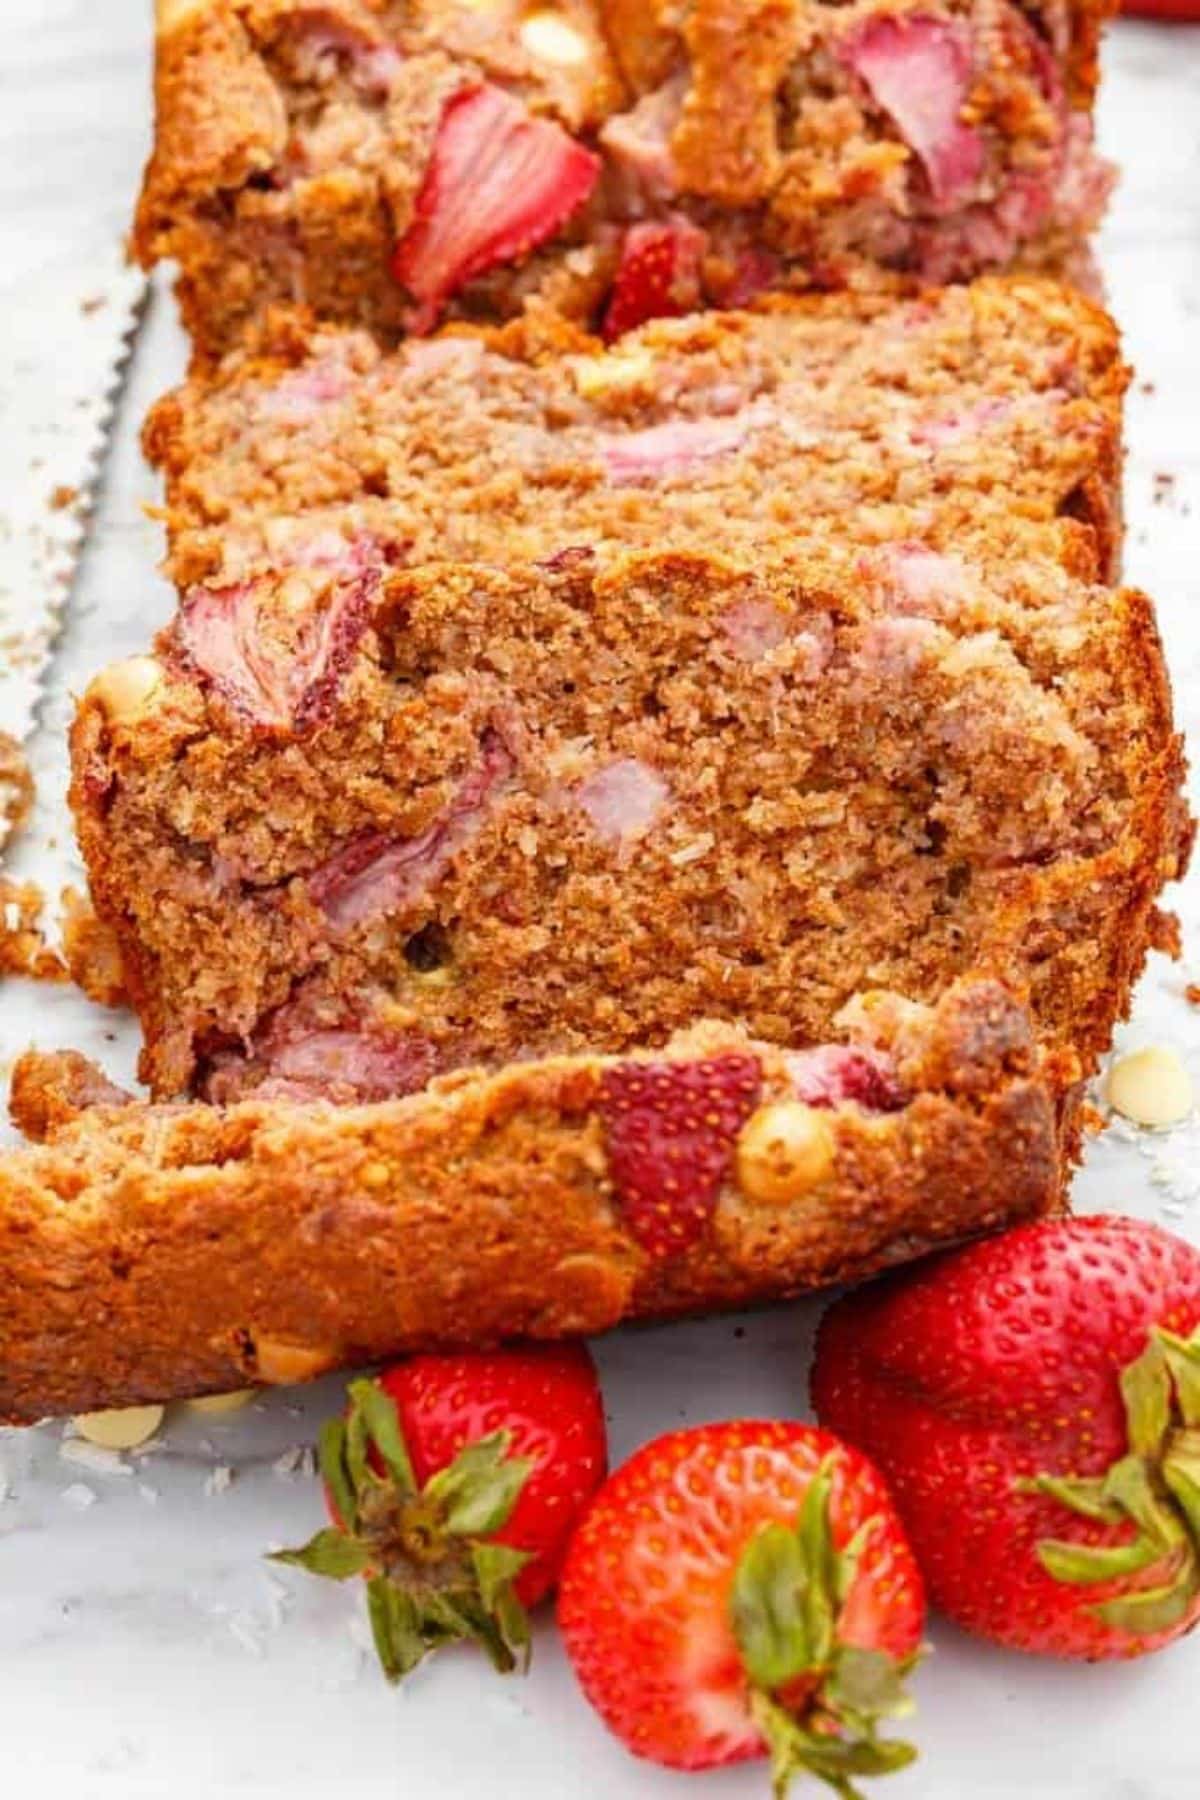 Partially sliced White Chocolate Strawberry Banana Bread on a table.